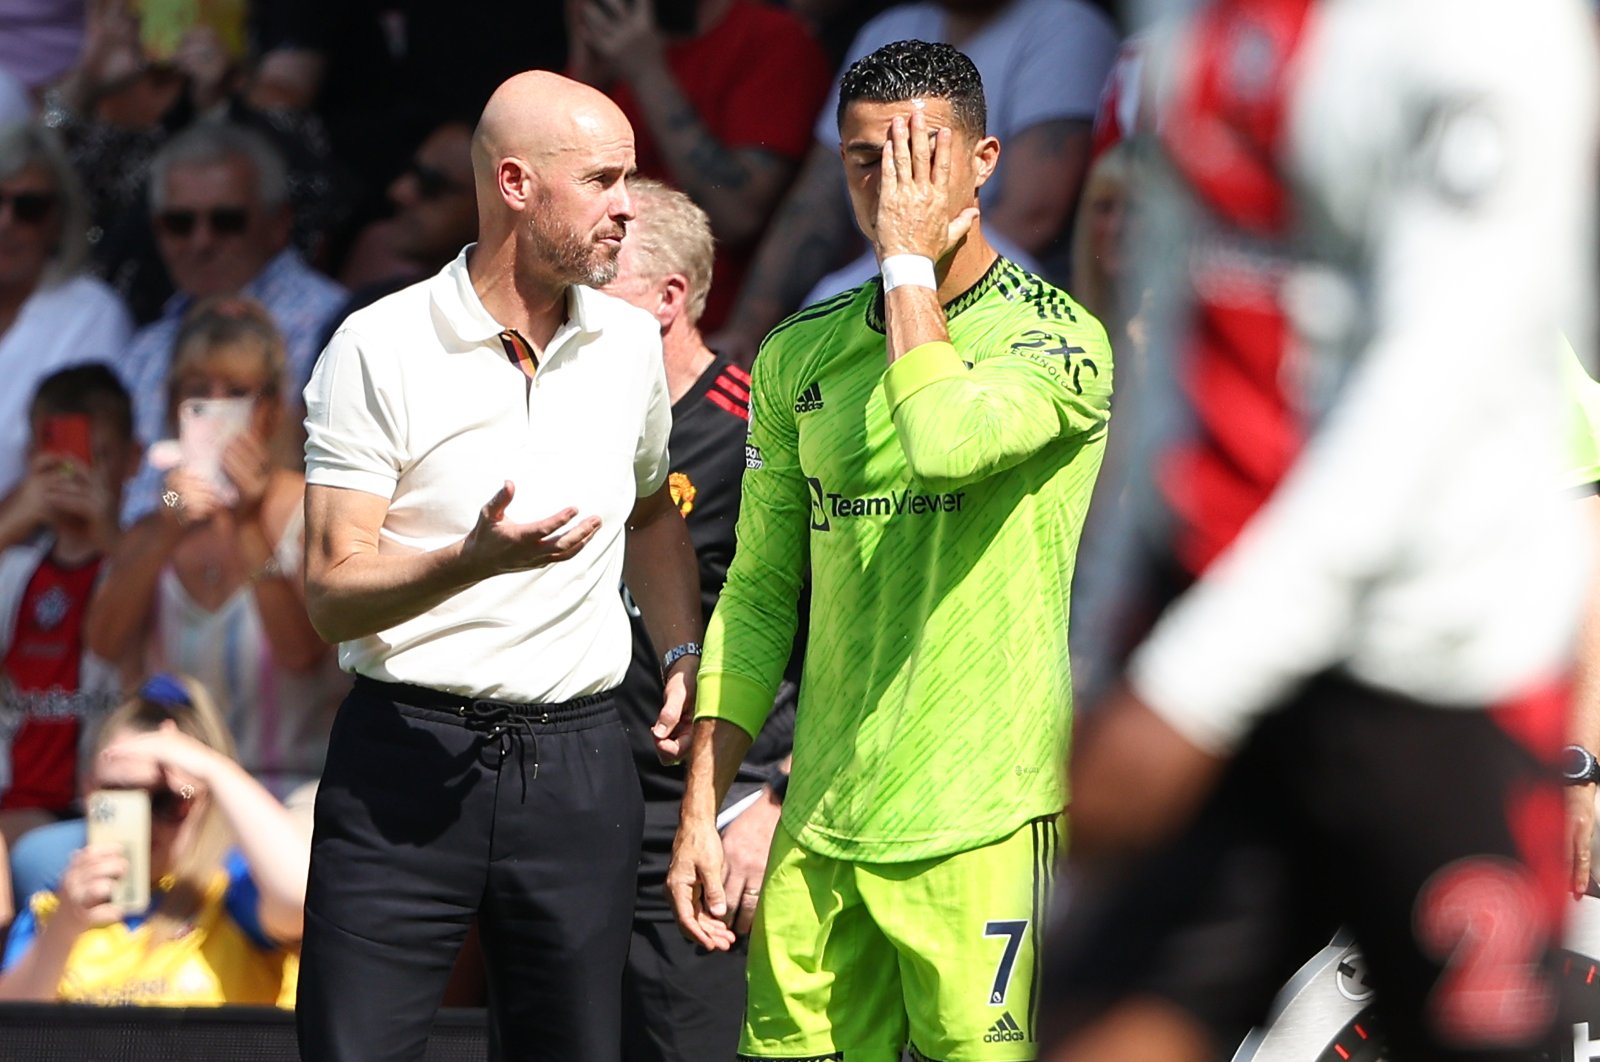 Erik ten Hag the manager and head coach of Manchester United, and Cristiano Ronaldo of Manchester United speak during a Premier League match, Southampton, U.K., August 2022.  (Getty Images)